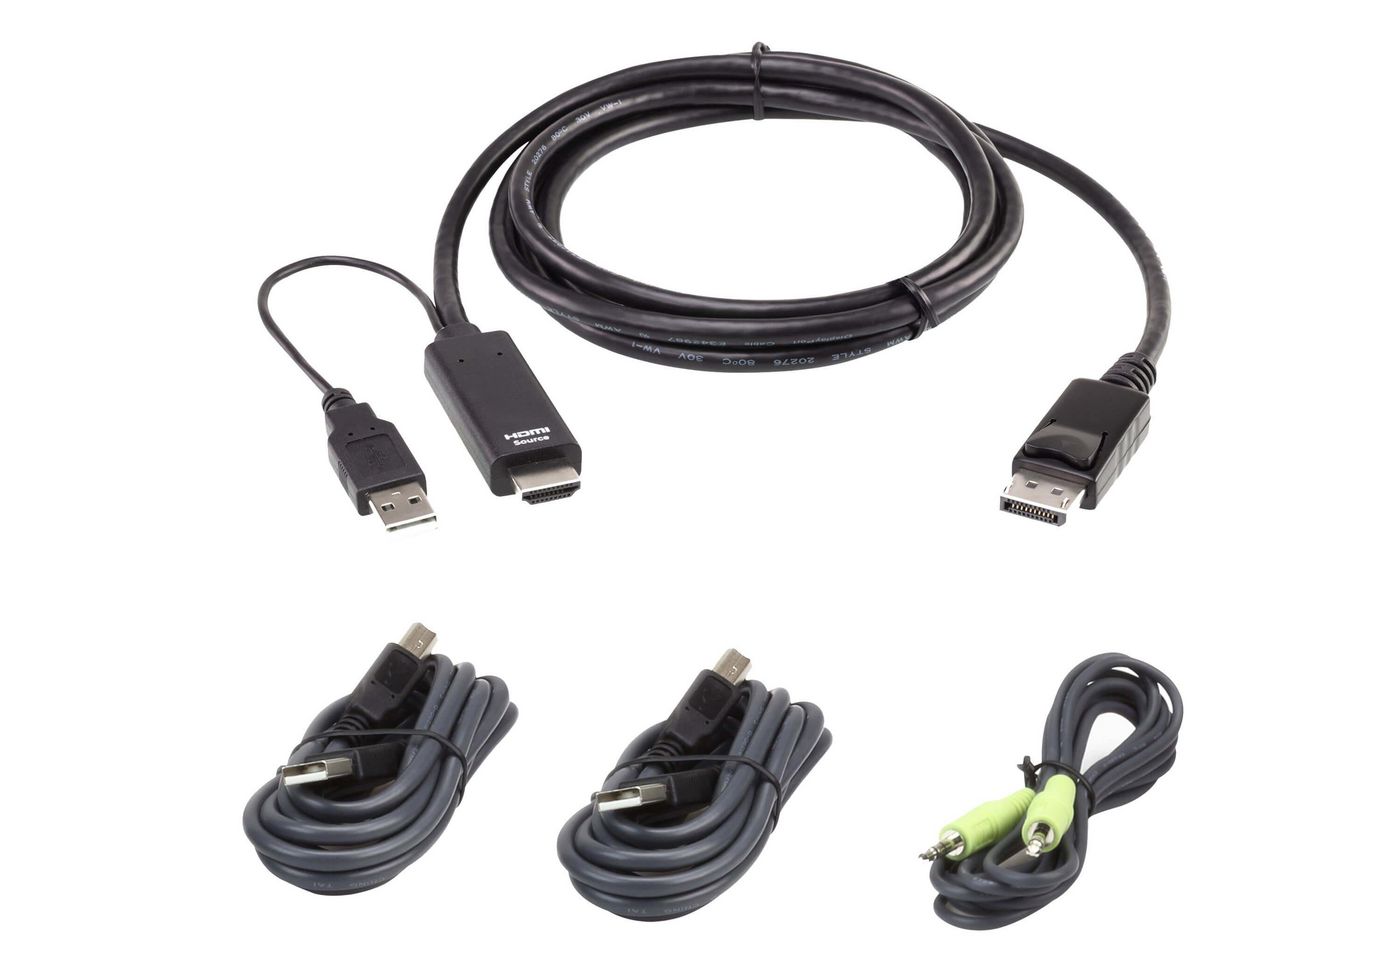 Cable kit: 1x True 4K 1.8M HDMI to DisplayPort Active Cable with seperate 2x USB and 1x audio cables